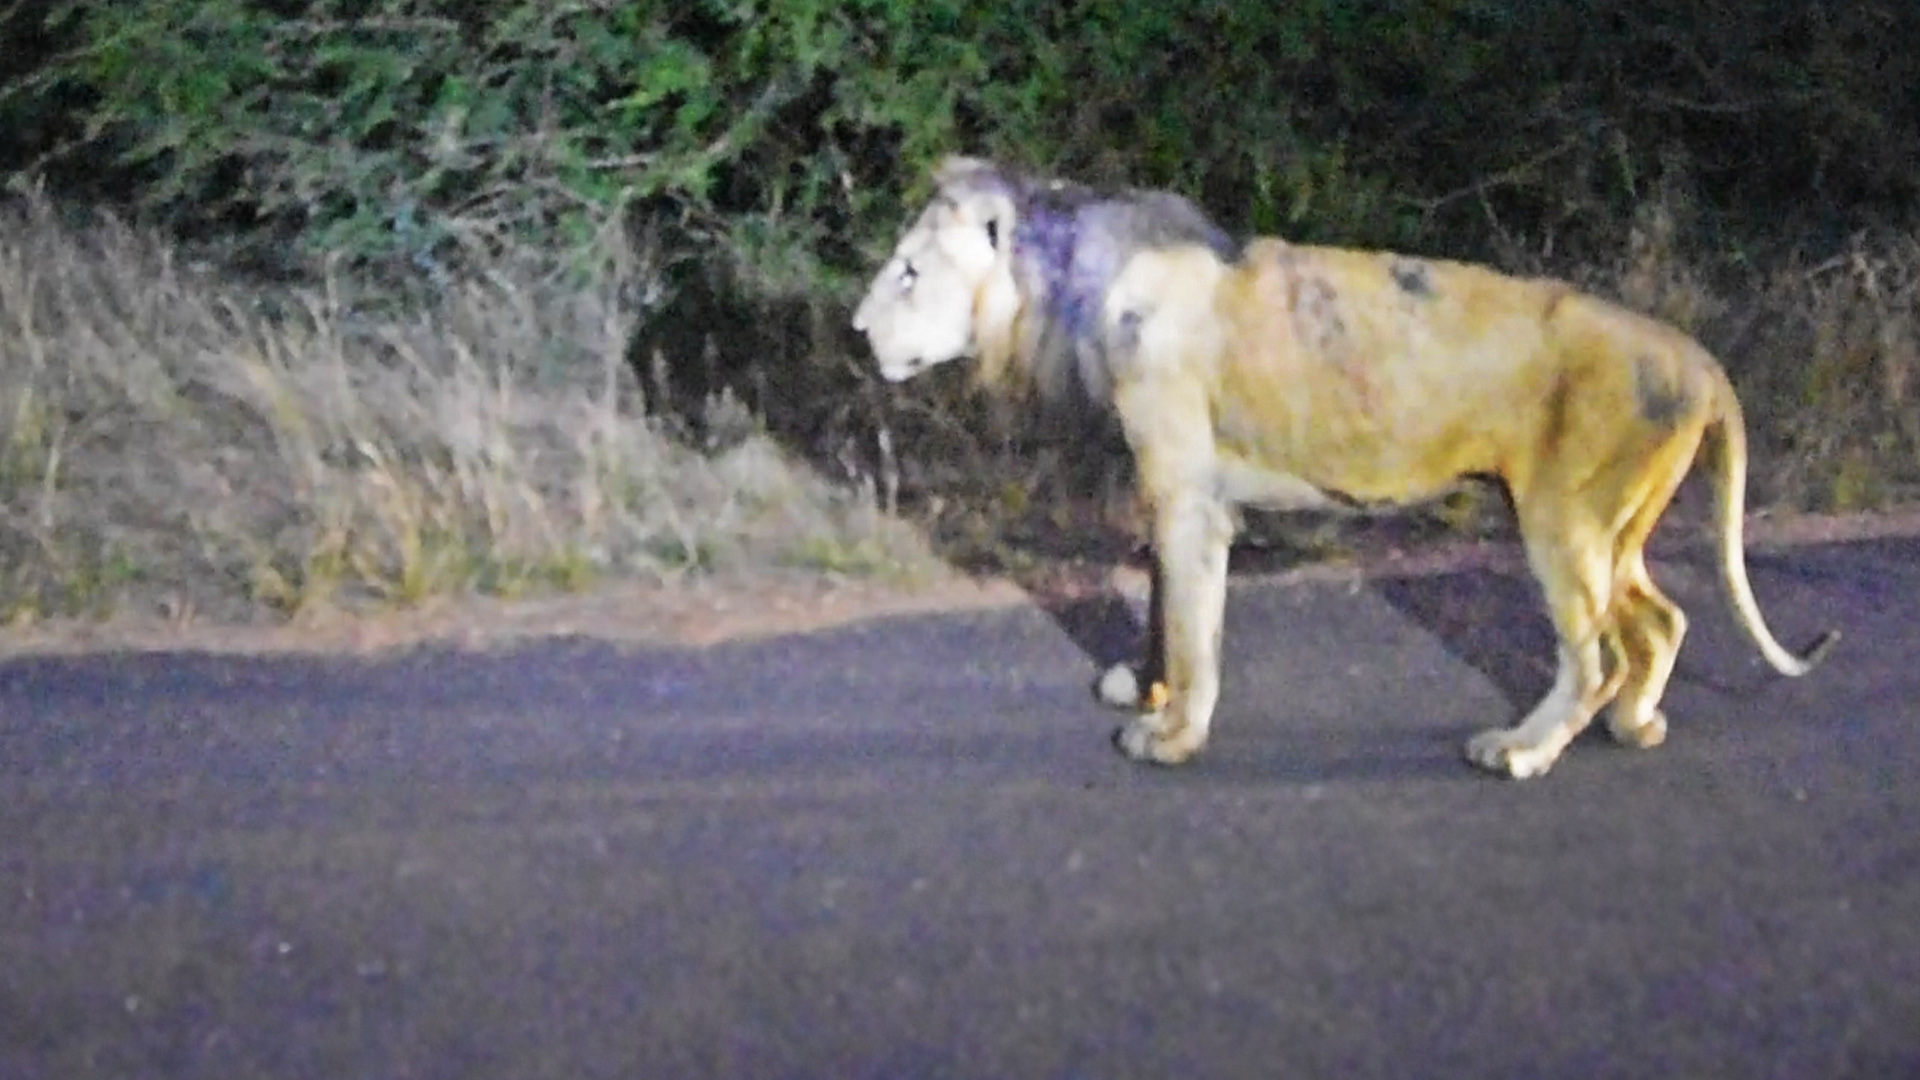 Heartbreaking Moments for the Oldest Lion in Kruger